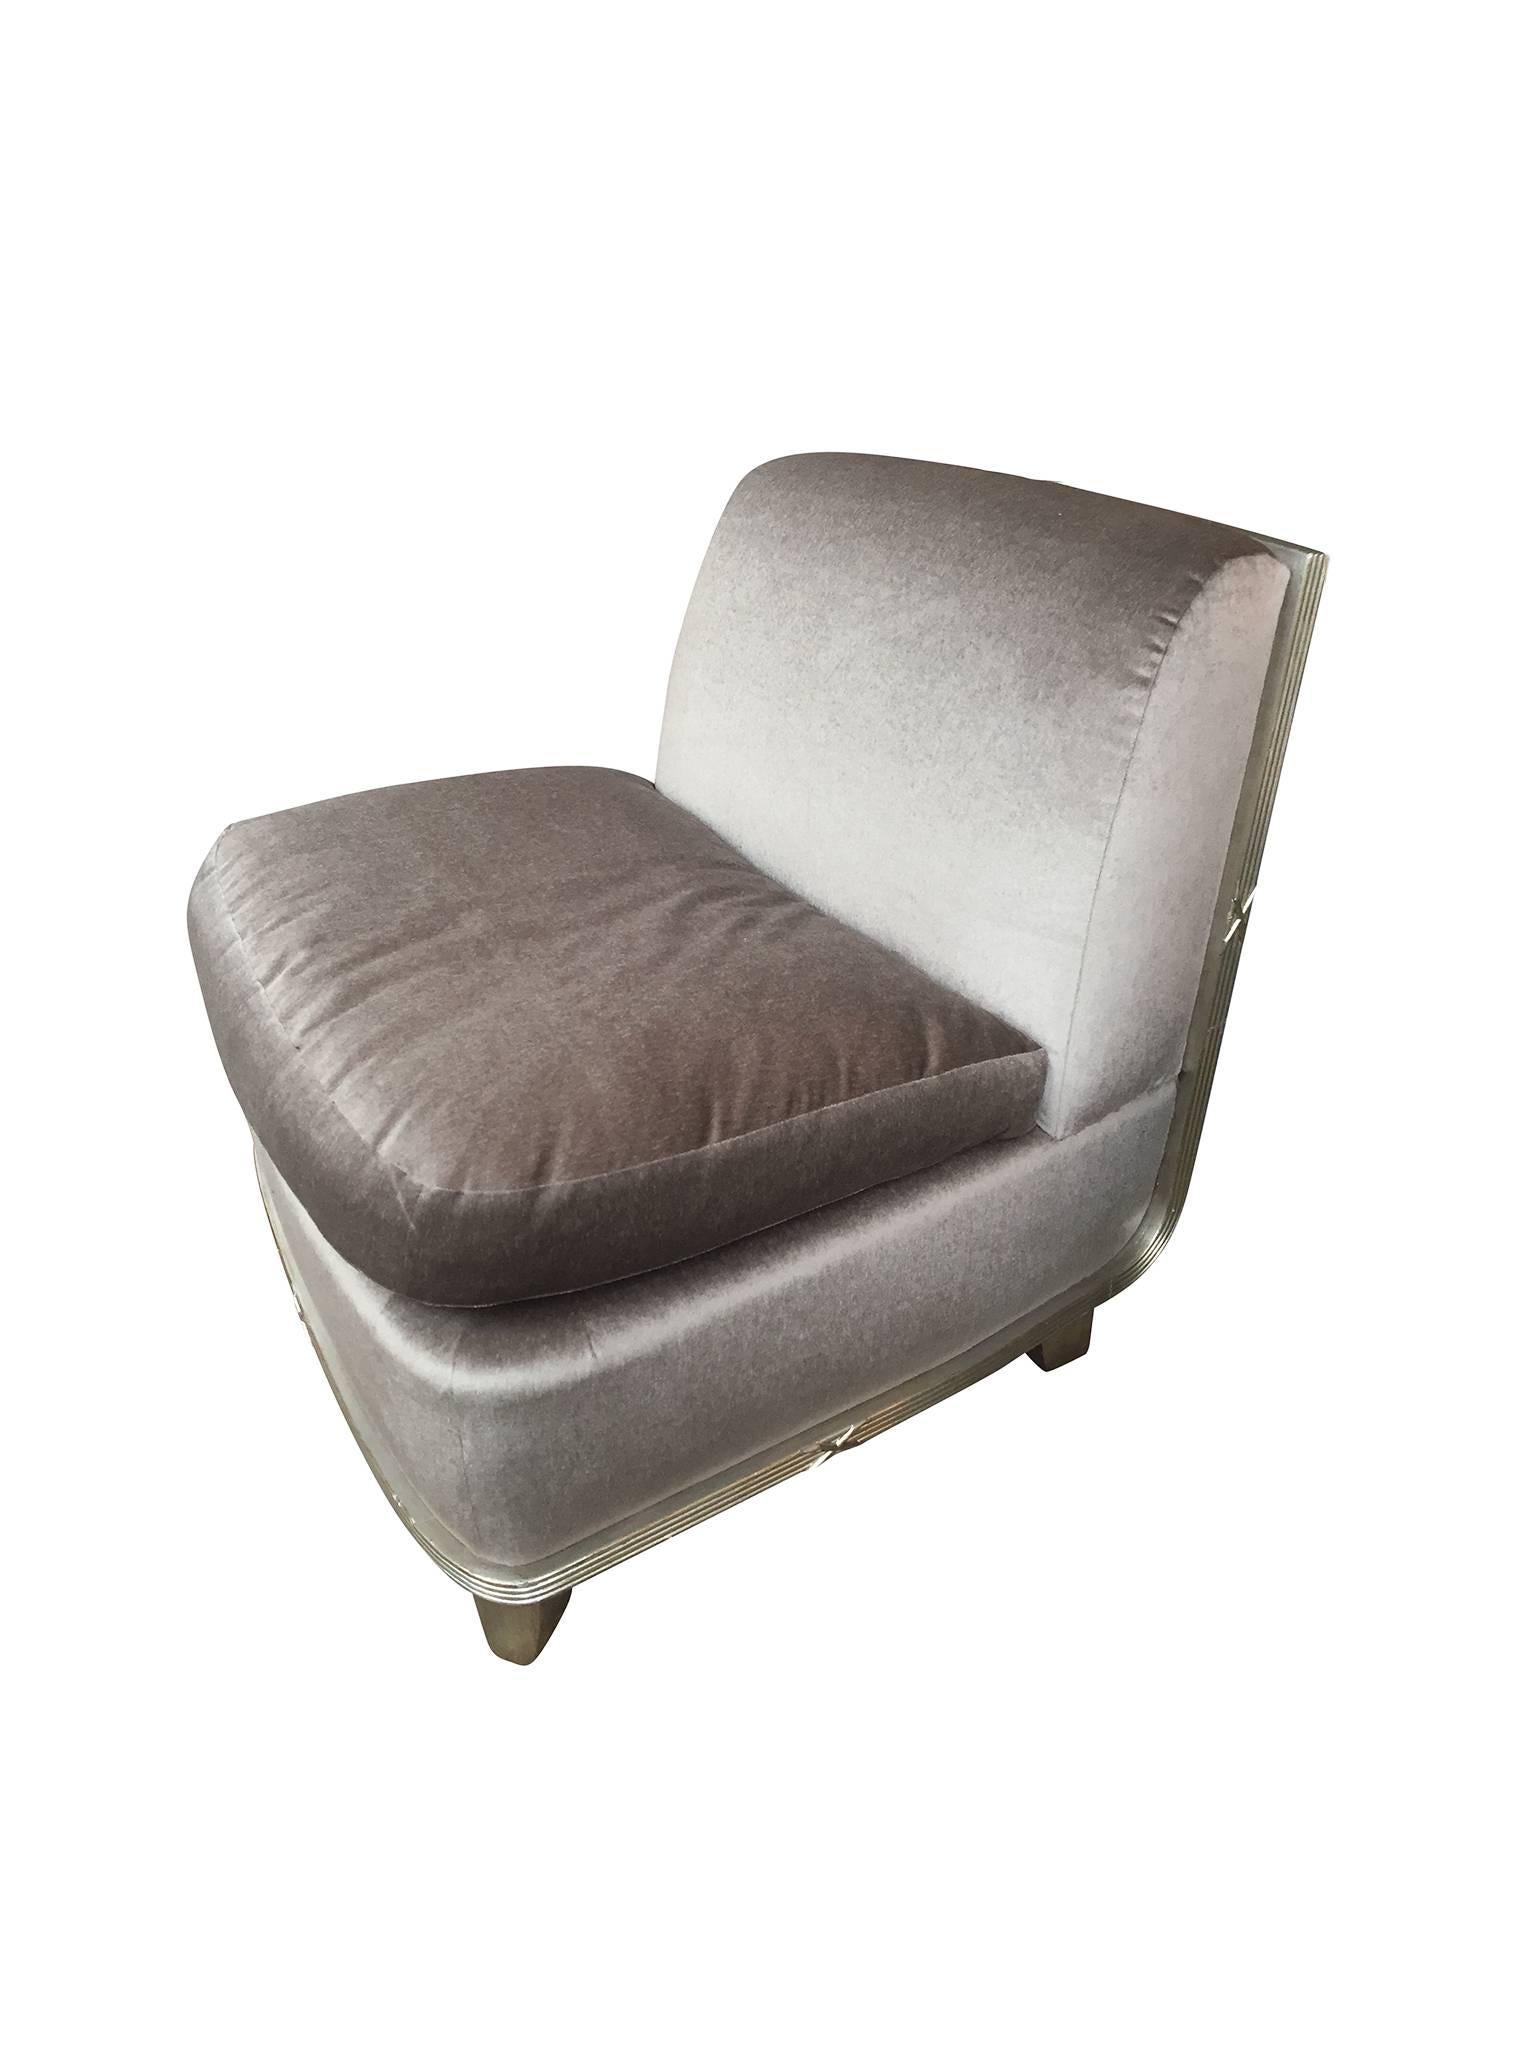 Hand-Painted 1960s Silver Mohair Lounge Chair in the Style of James Mont